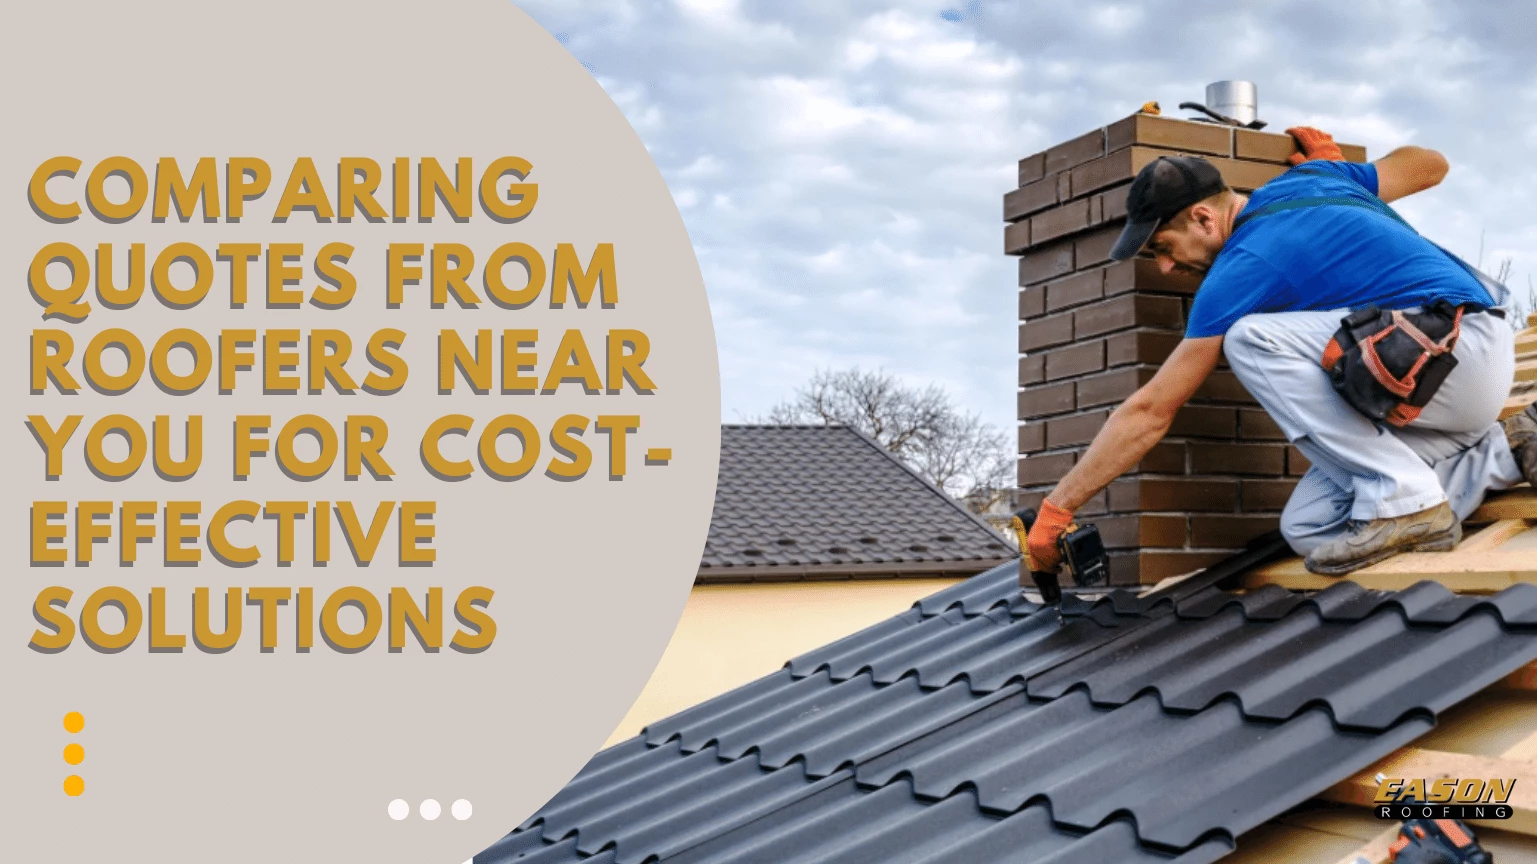 Comparing Quotes from Roofers Near You for Cost-Effective Solutions